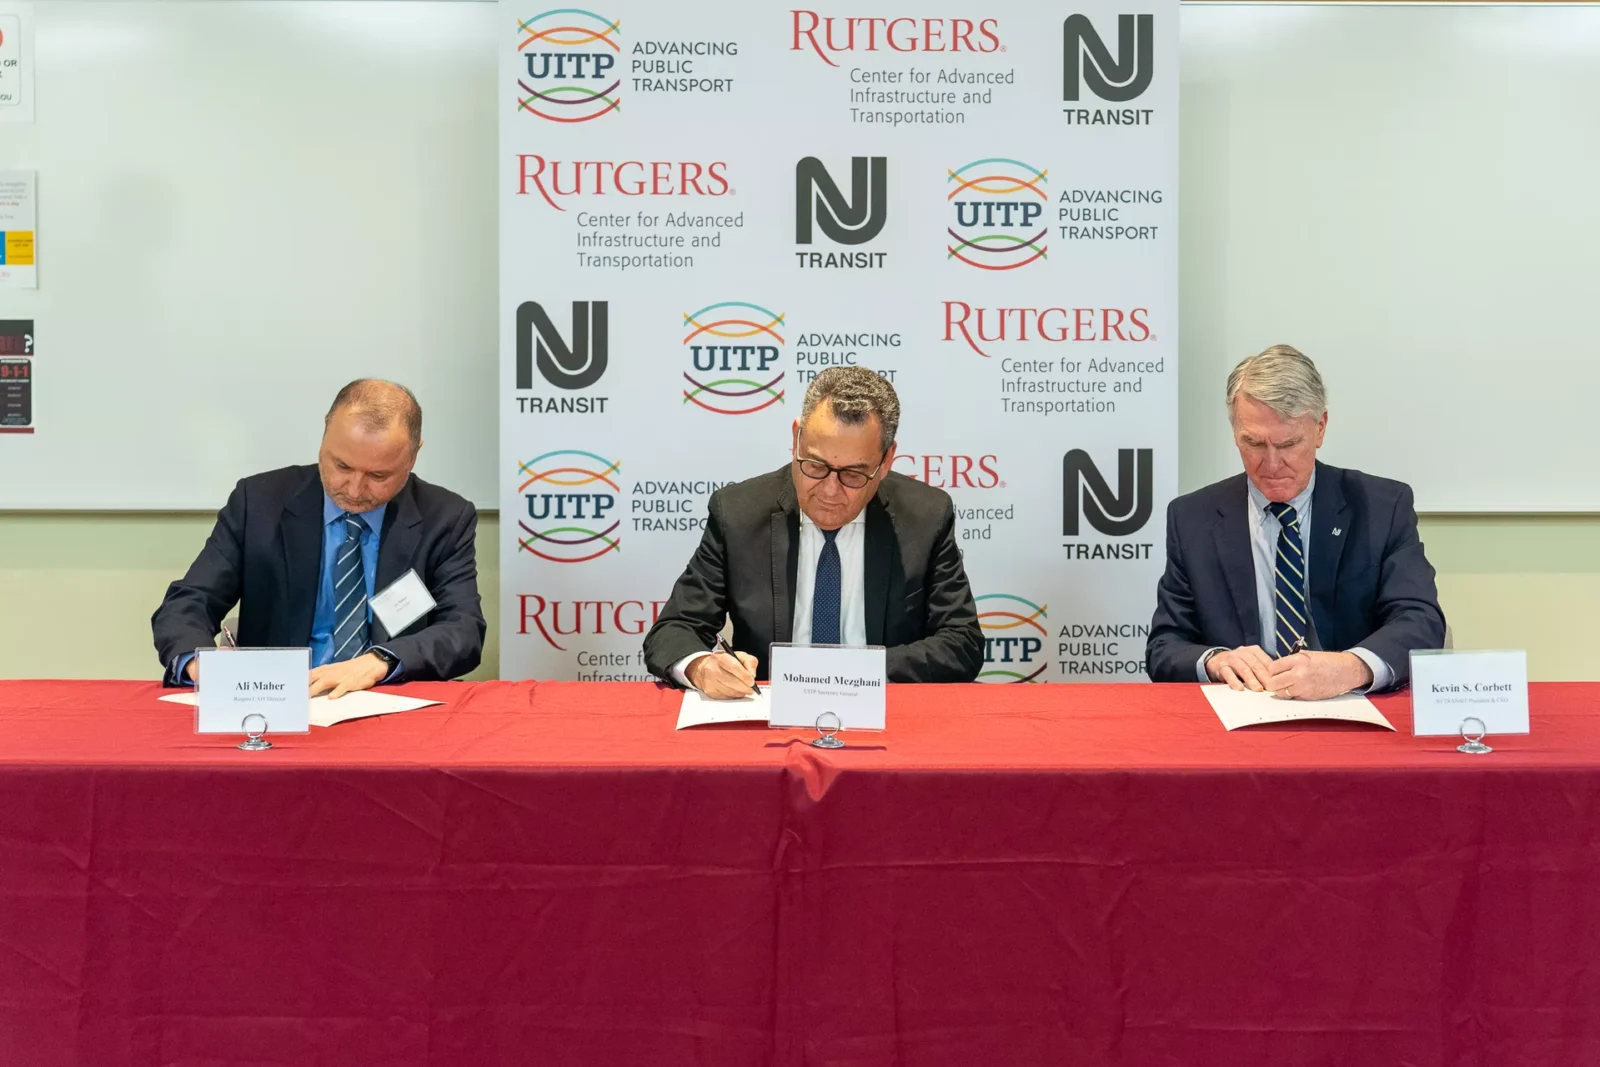 A ceremony hosted by NJ TRANSIT, brought UITP Secretary General, Mohamed Mezghani* and UITP Board Member and NJ TRANSIT President & CEO Kevin S. Corbett alongside Rutgers Director Dr. Ali Maher to sign the agreement and formalise the partnership at Rutgers CAIT.